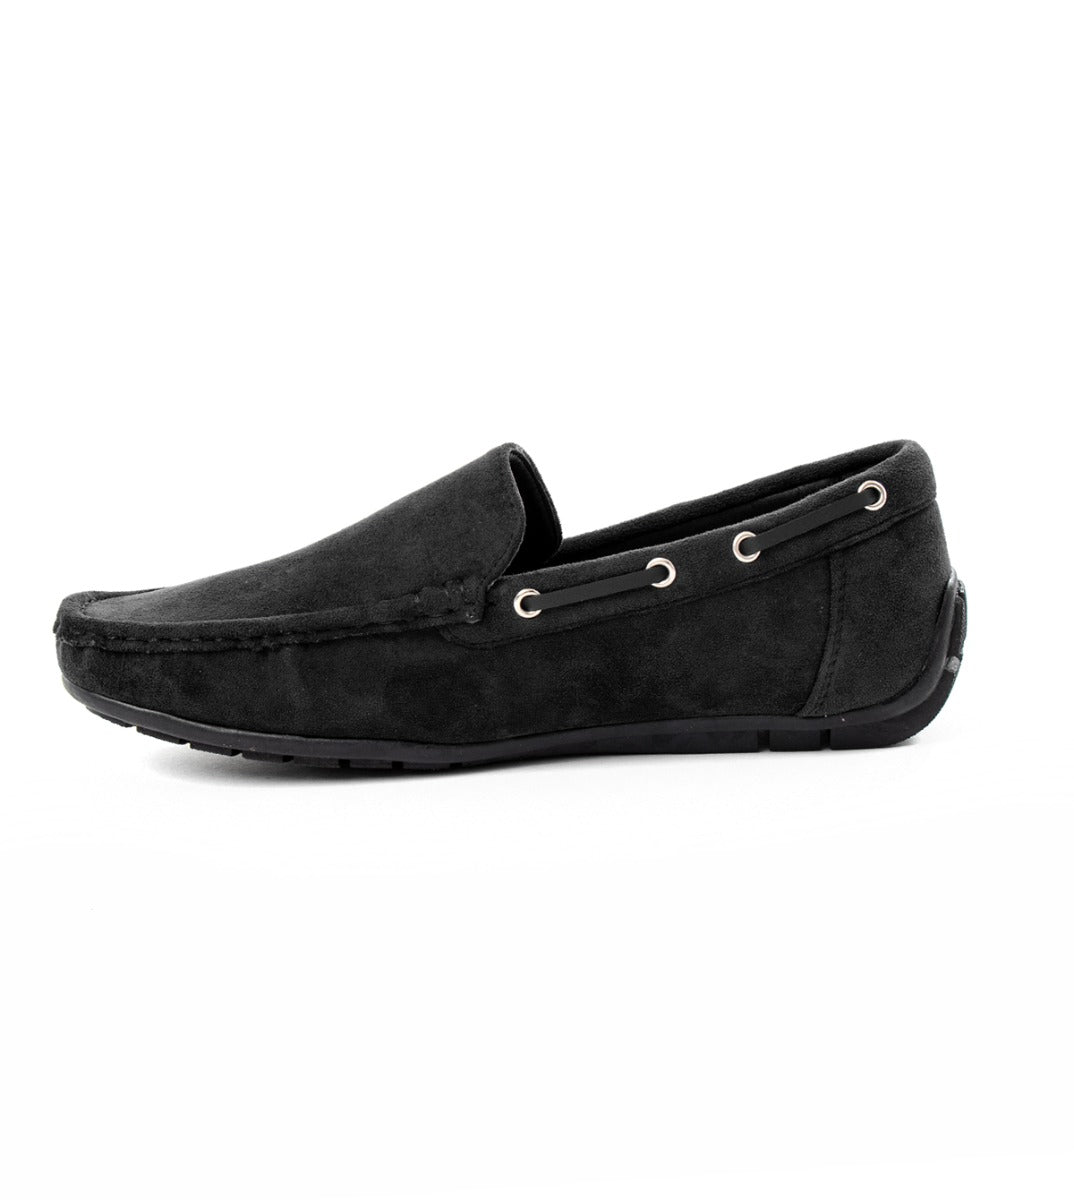 Men's Shoes Elegant Sporty Black Suede Loafers GIOSAL-S1122A